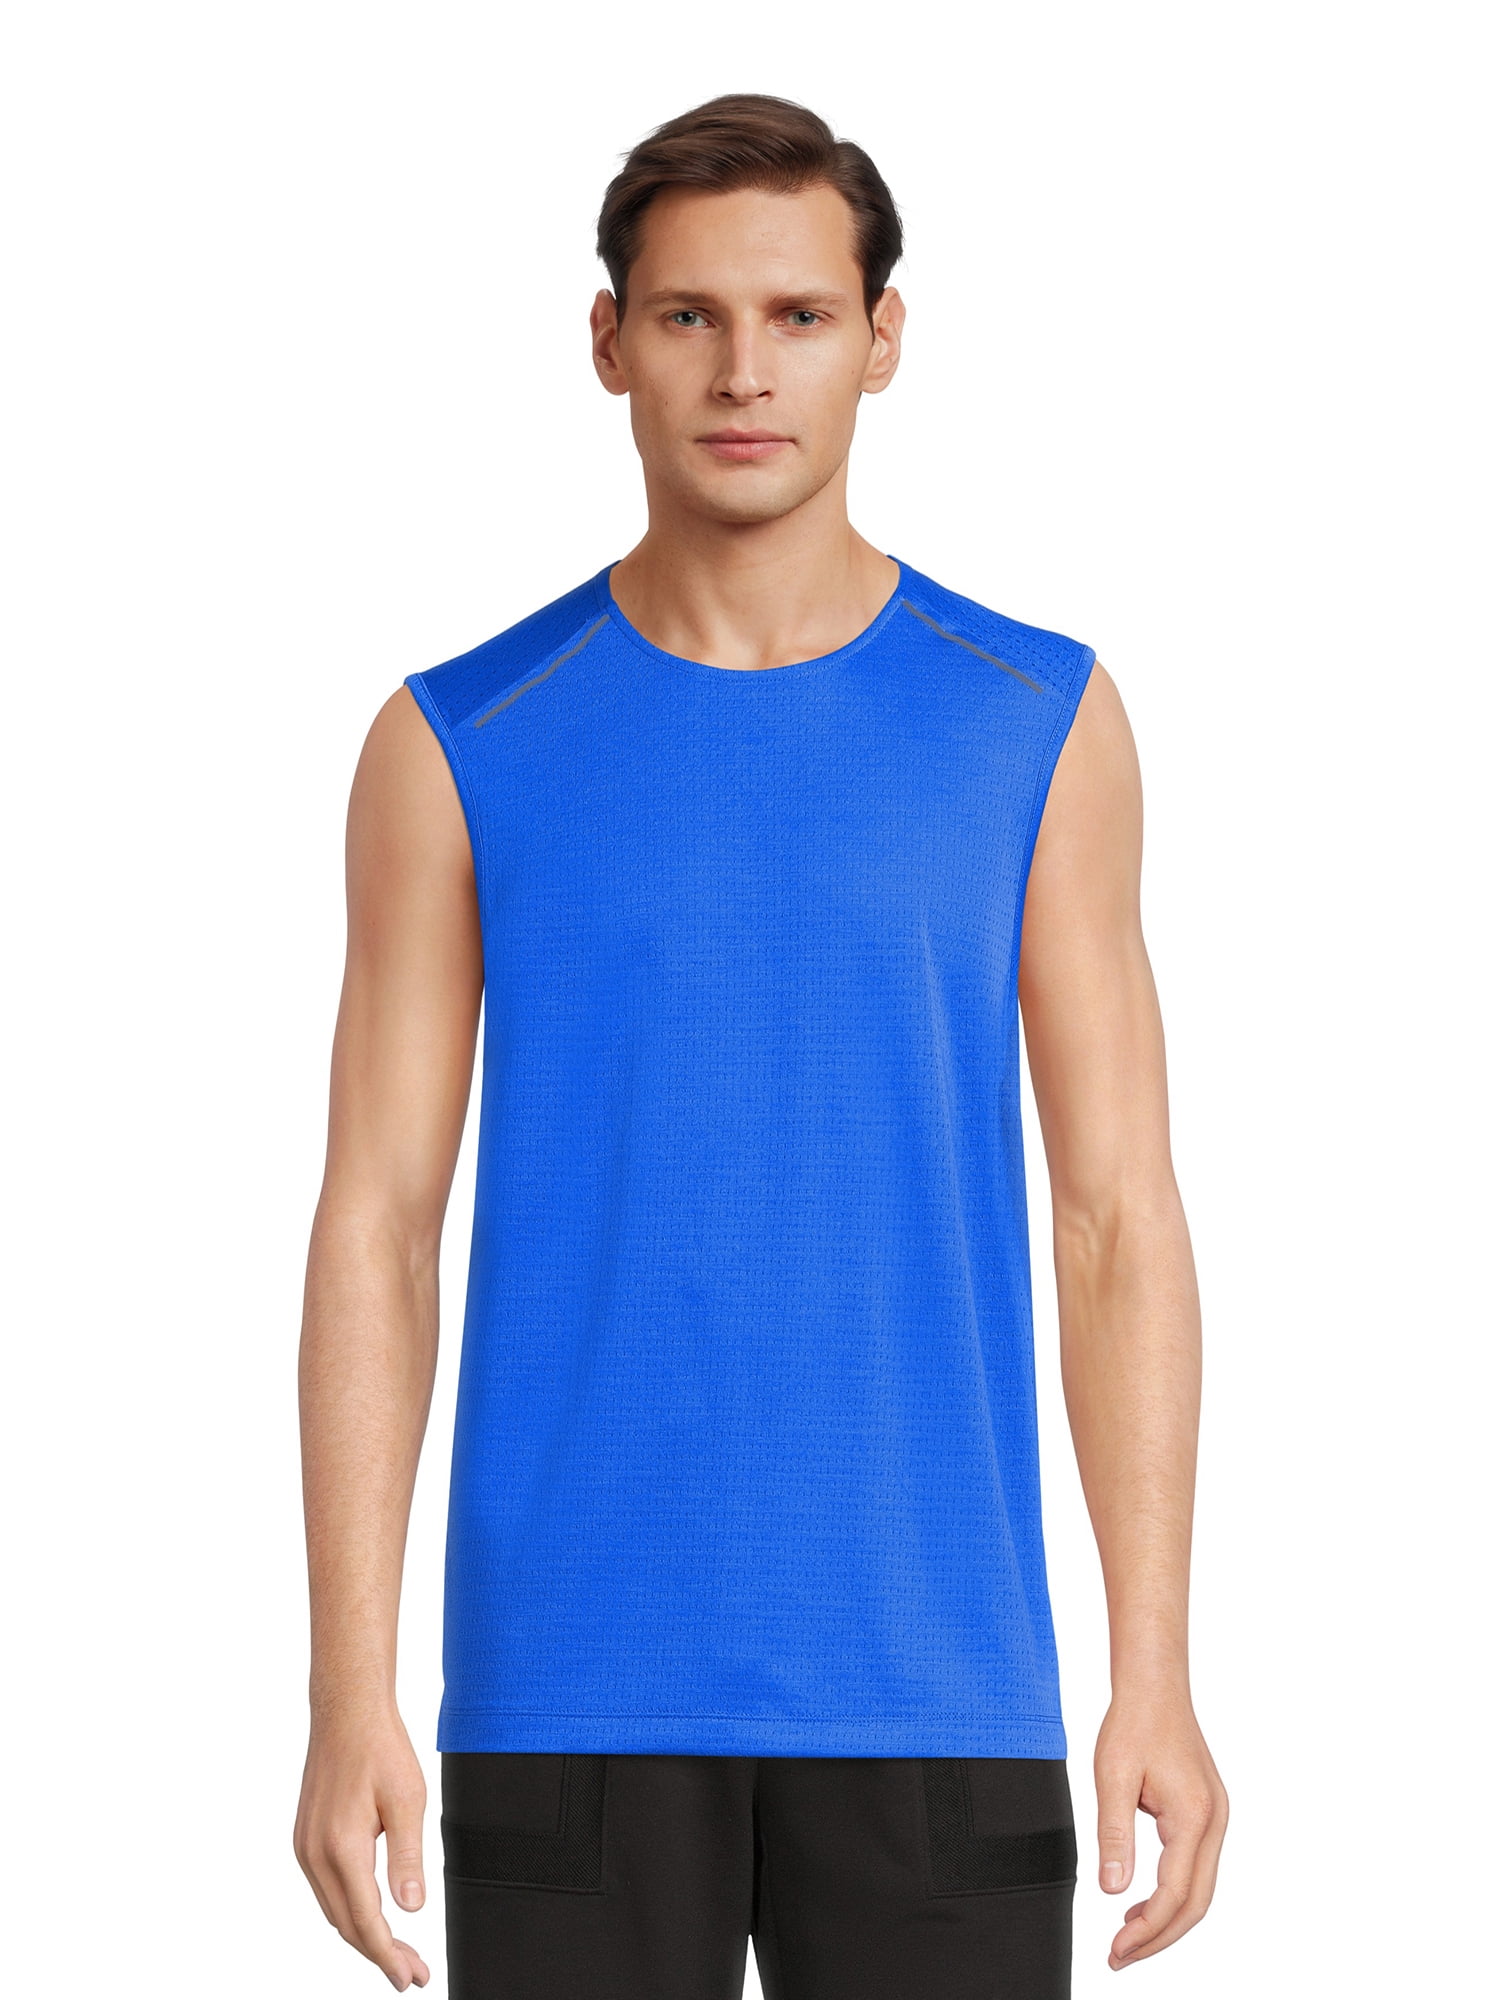 Athletic Works Men's Performance Sleeveless Muscle Tee, Sizes S-3XL ...